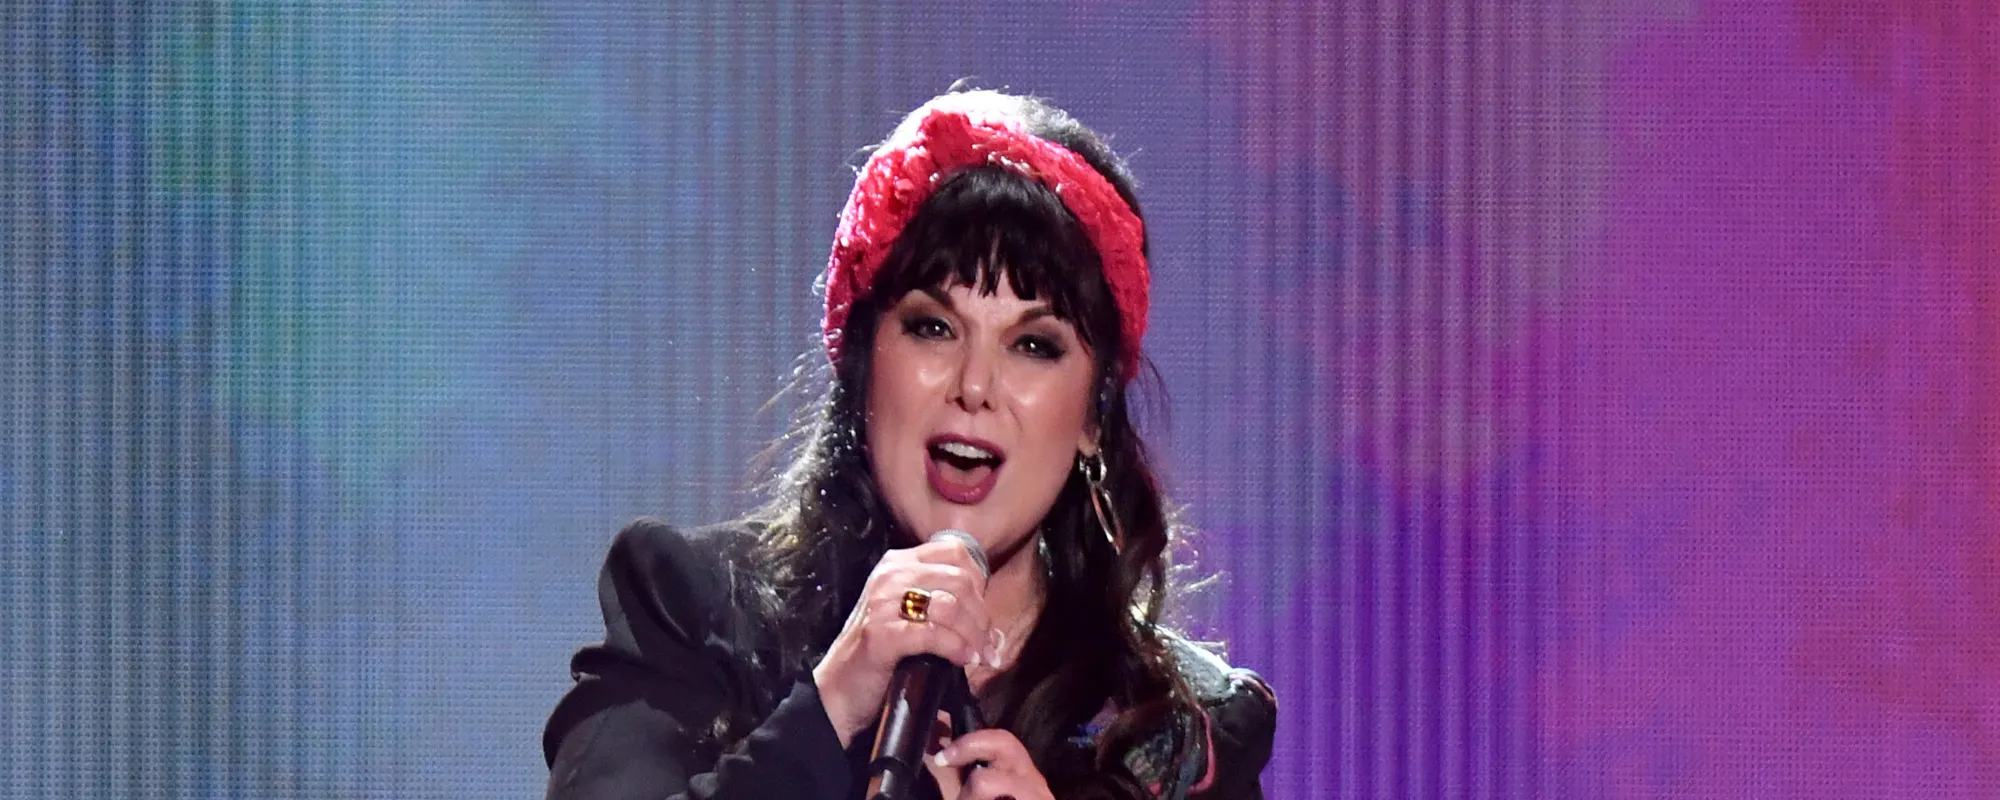 Heart’s Ann Wilson Hints at New Music Ahead of First Tour in Half a Decade